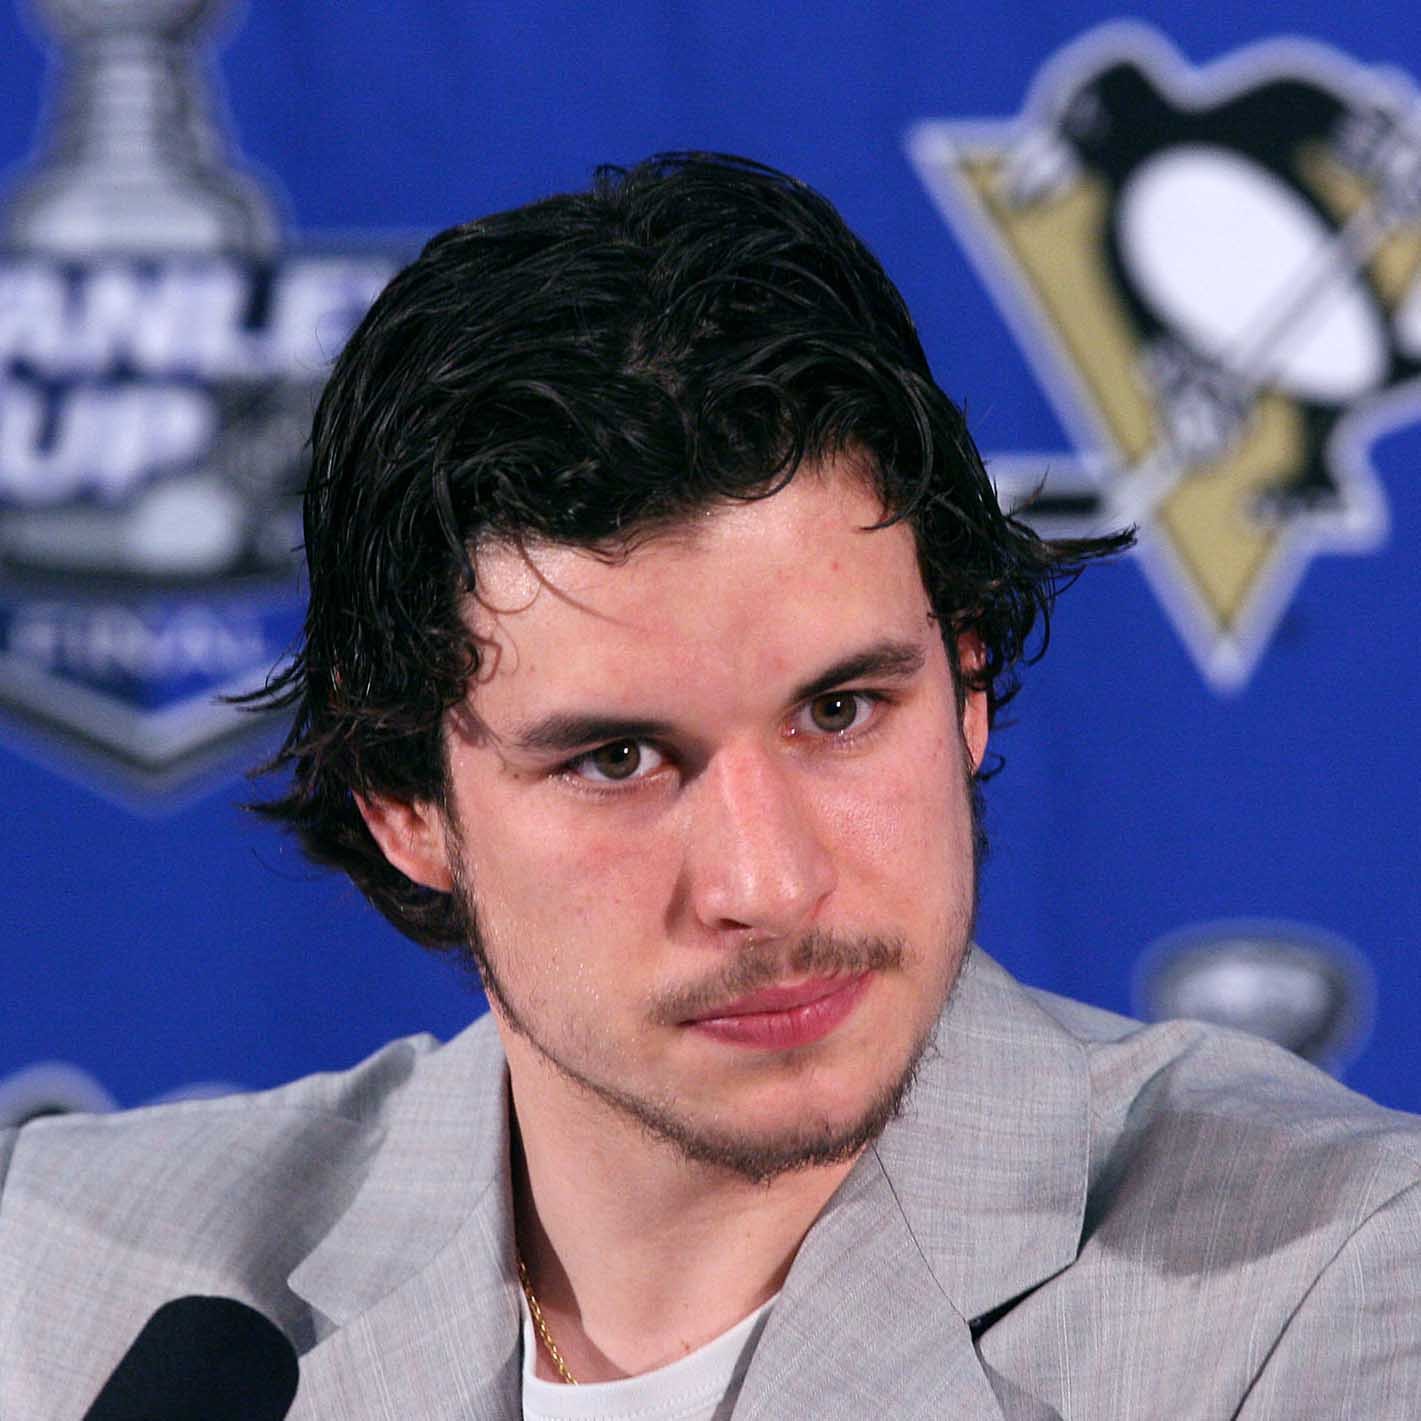 pictures-of-phillip-crosby - pictures-of-phillip-crosby